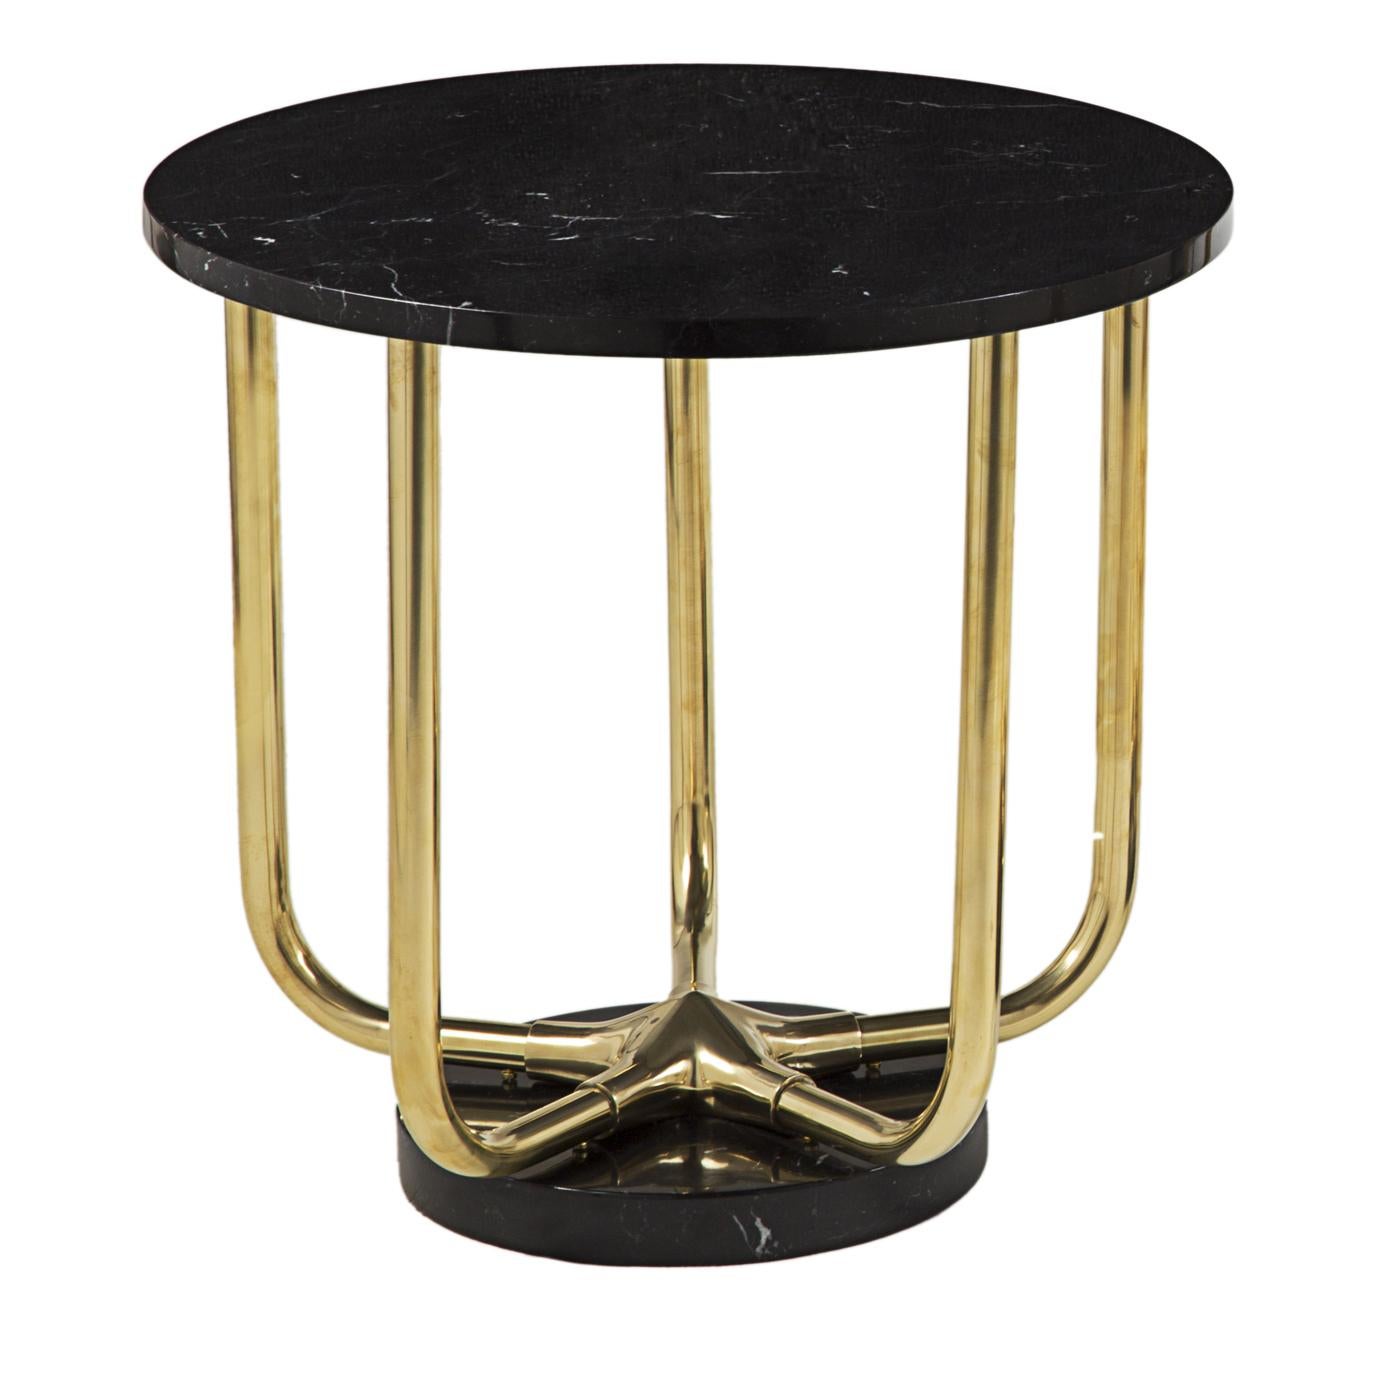 This table is small only in dimensions, because its precious materials and bold lines give it a strong character that will make a statement in any decor. The black Marquina marble of the round base and top strikingly complement the five brass legs